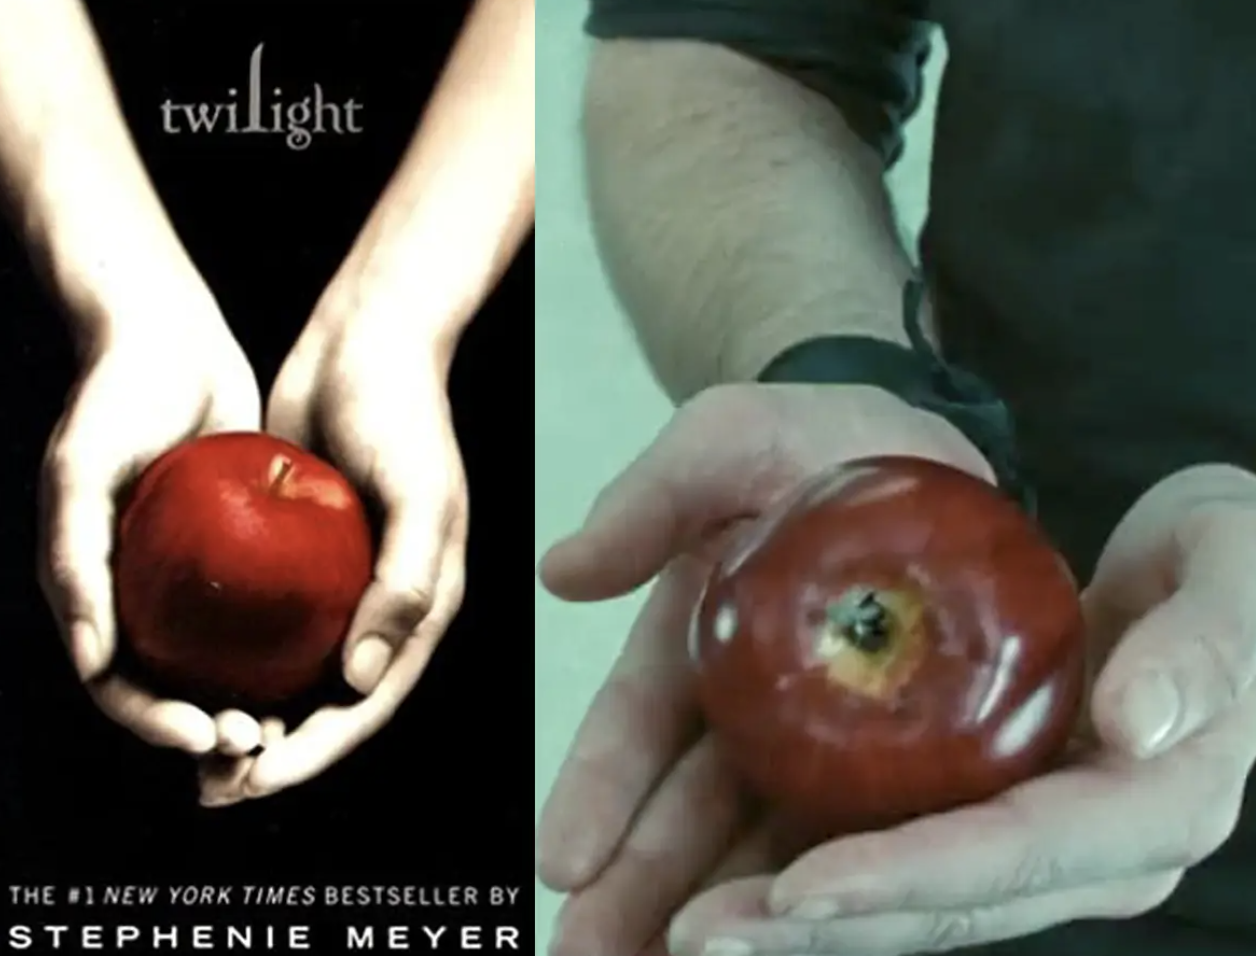 Comparison of the &quot;Twilight&quot; book cover with a scene from the film.